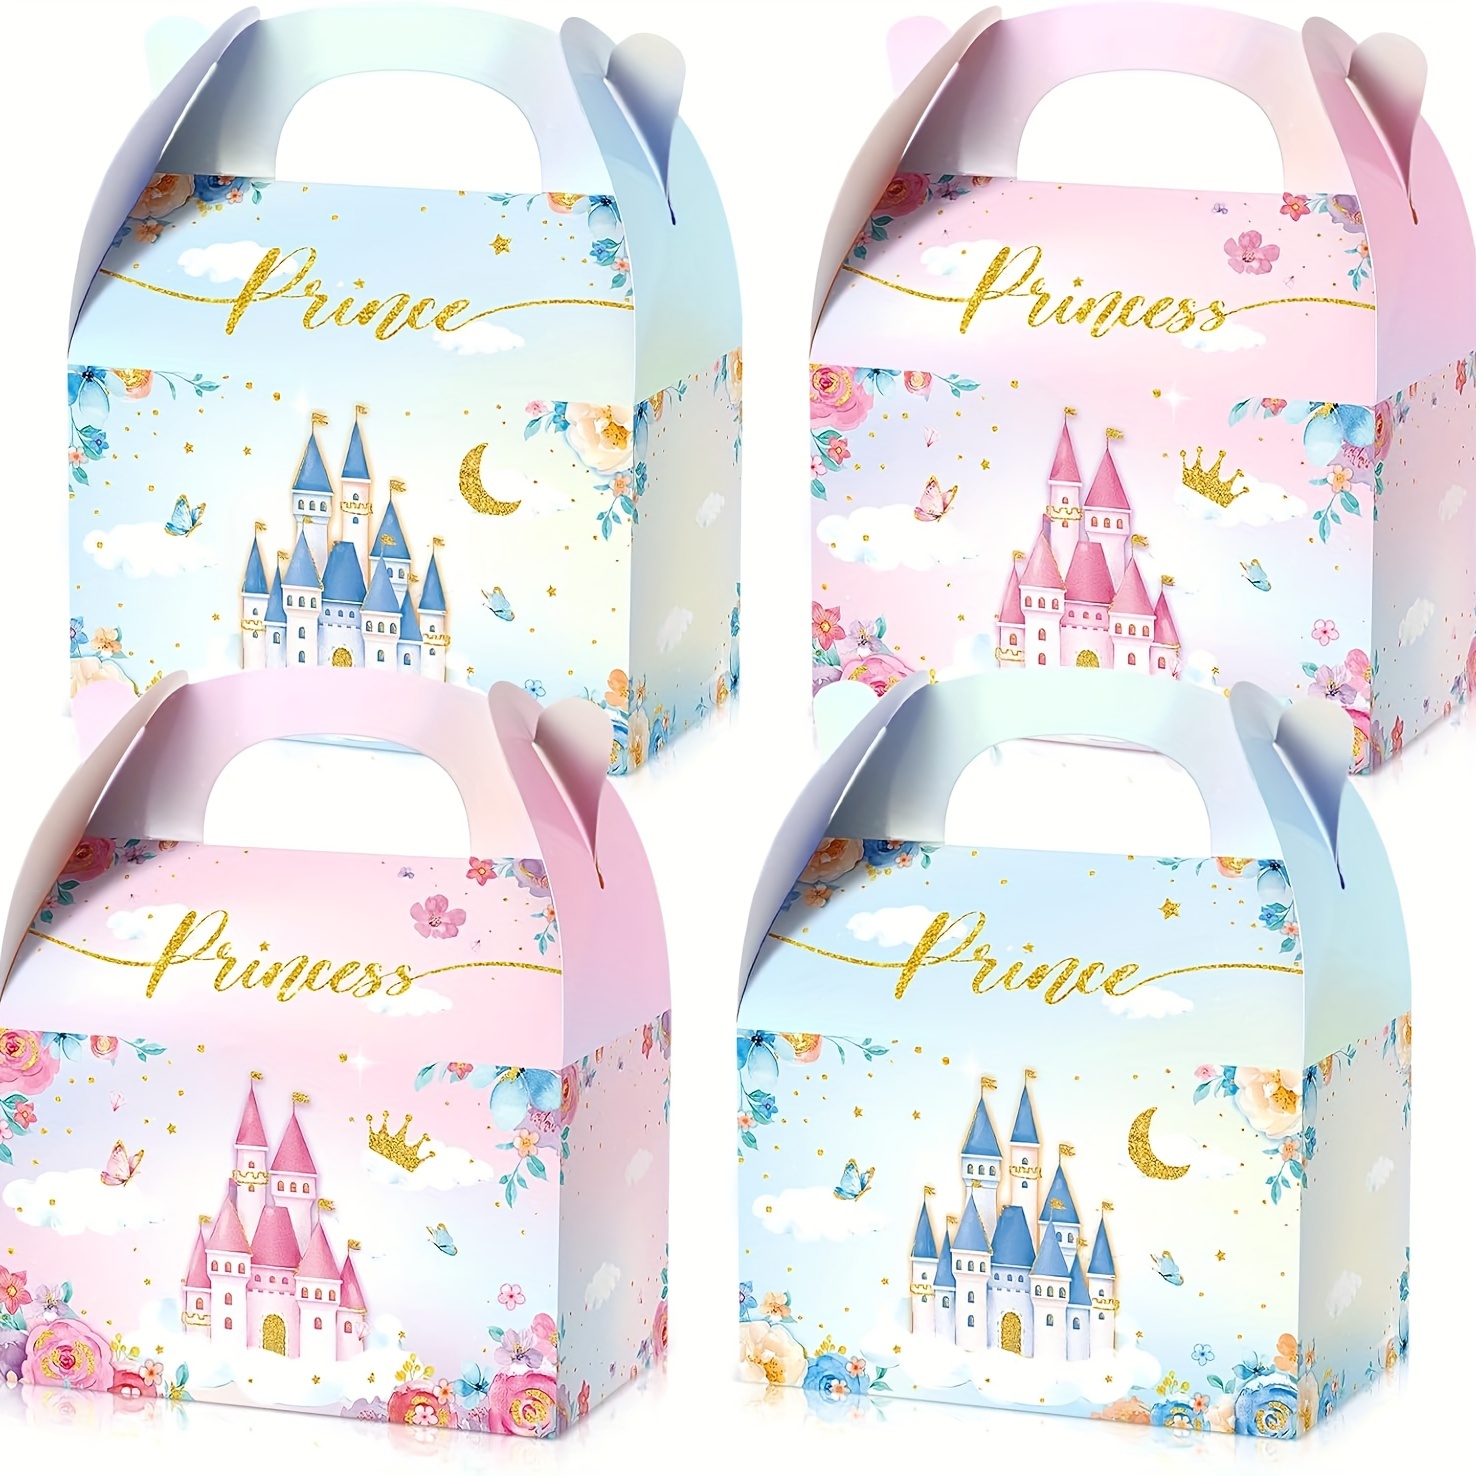 

6/12/18/24pcs, Princess And Prince Treat Boxes Pink Princess Boxes Blue Prince Castle Gift Boxes Little Princess Crown Goodie Boxes Royal Prince Cardboard Boxes For Birthday